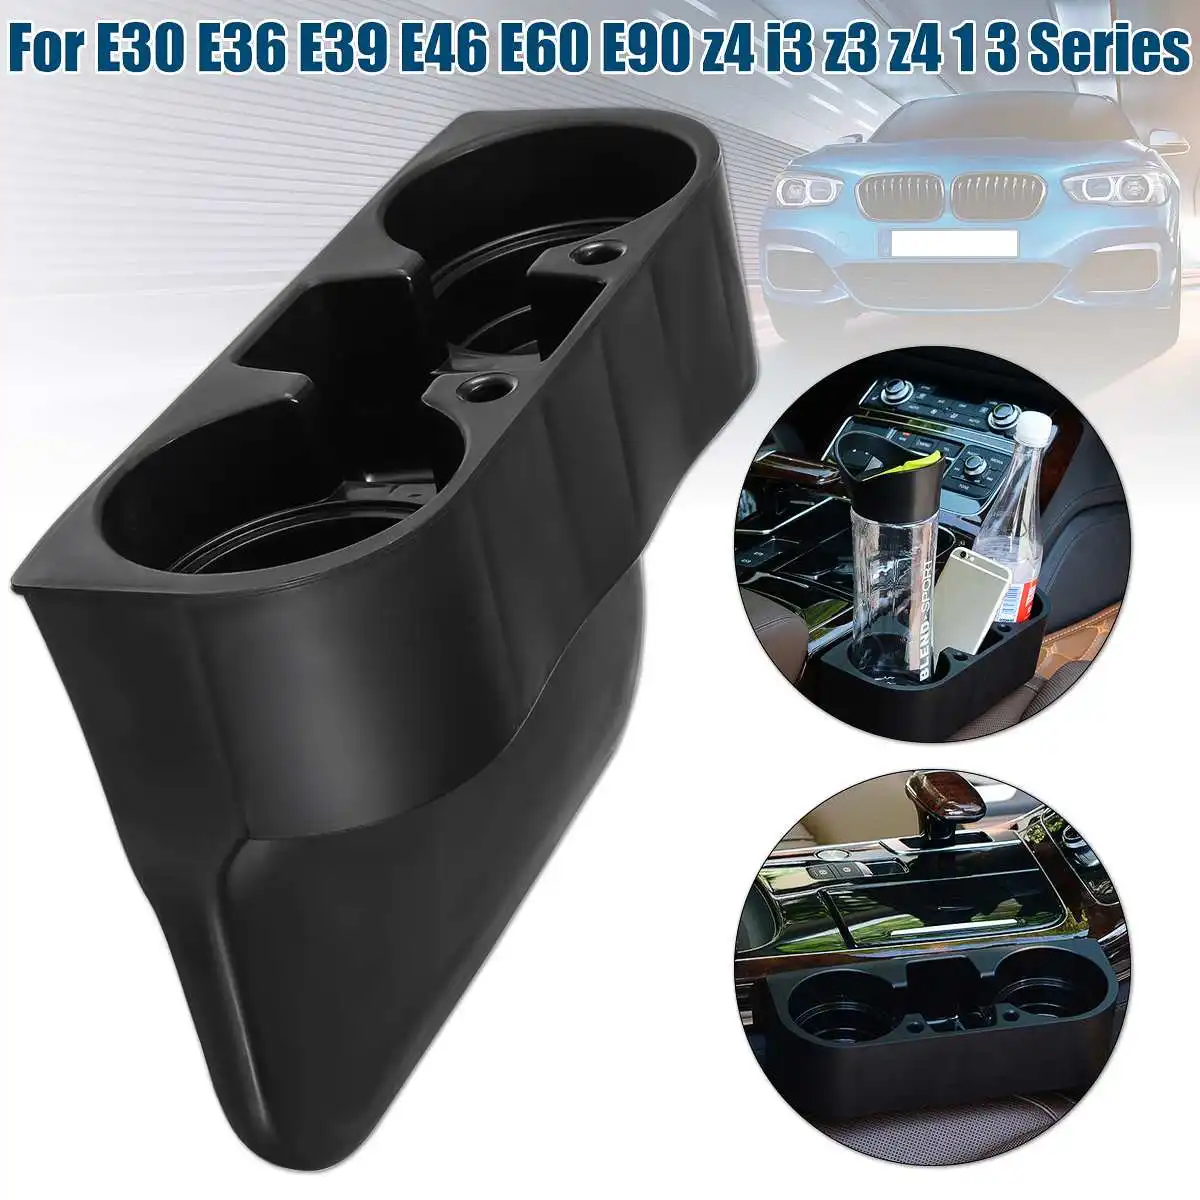 For BMW e30 e36 e39 e46 e60 e90 z4 i3 z3 z4 1 3 series Car Black Front Drinks Cup Holder Car Front Center Console Cup Rack